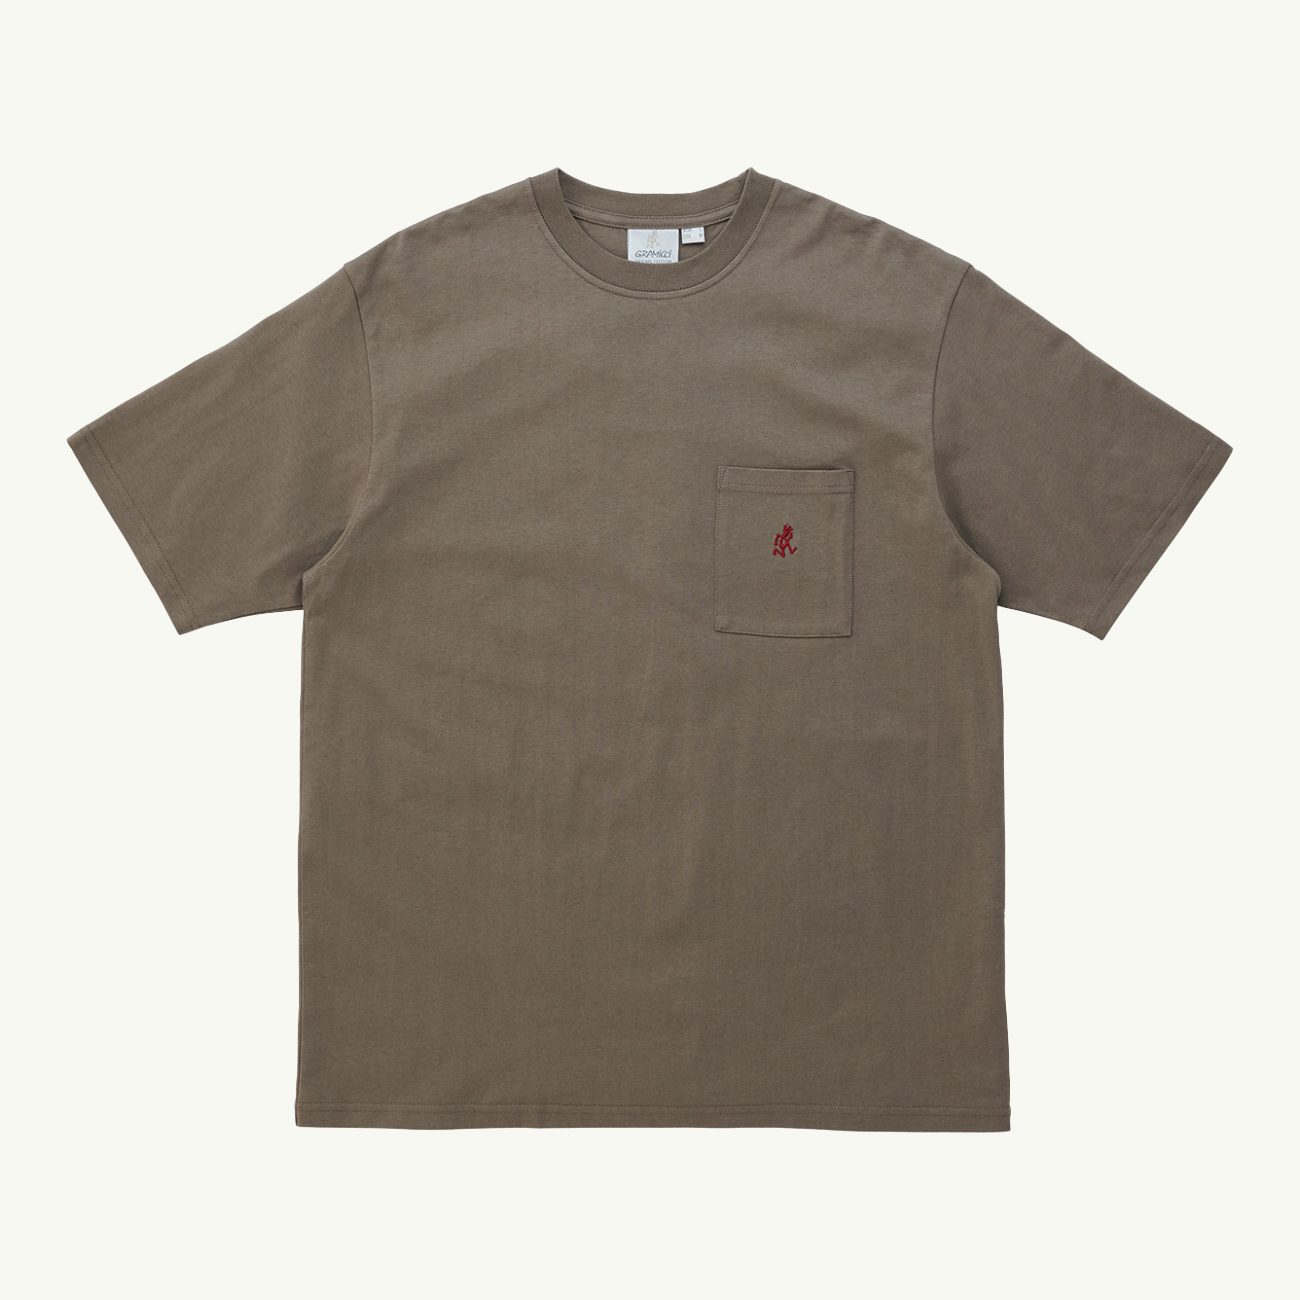 One Point Tee - Coyote